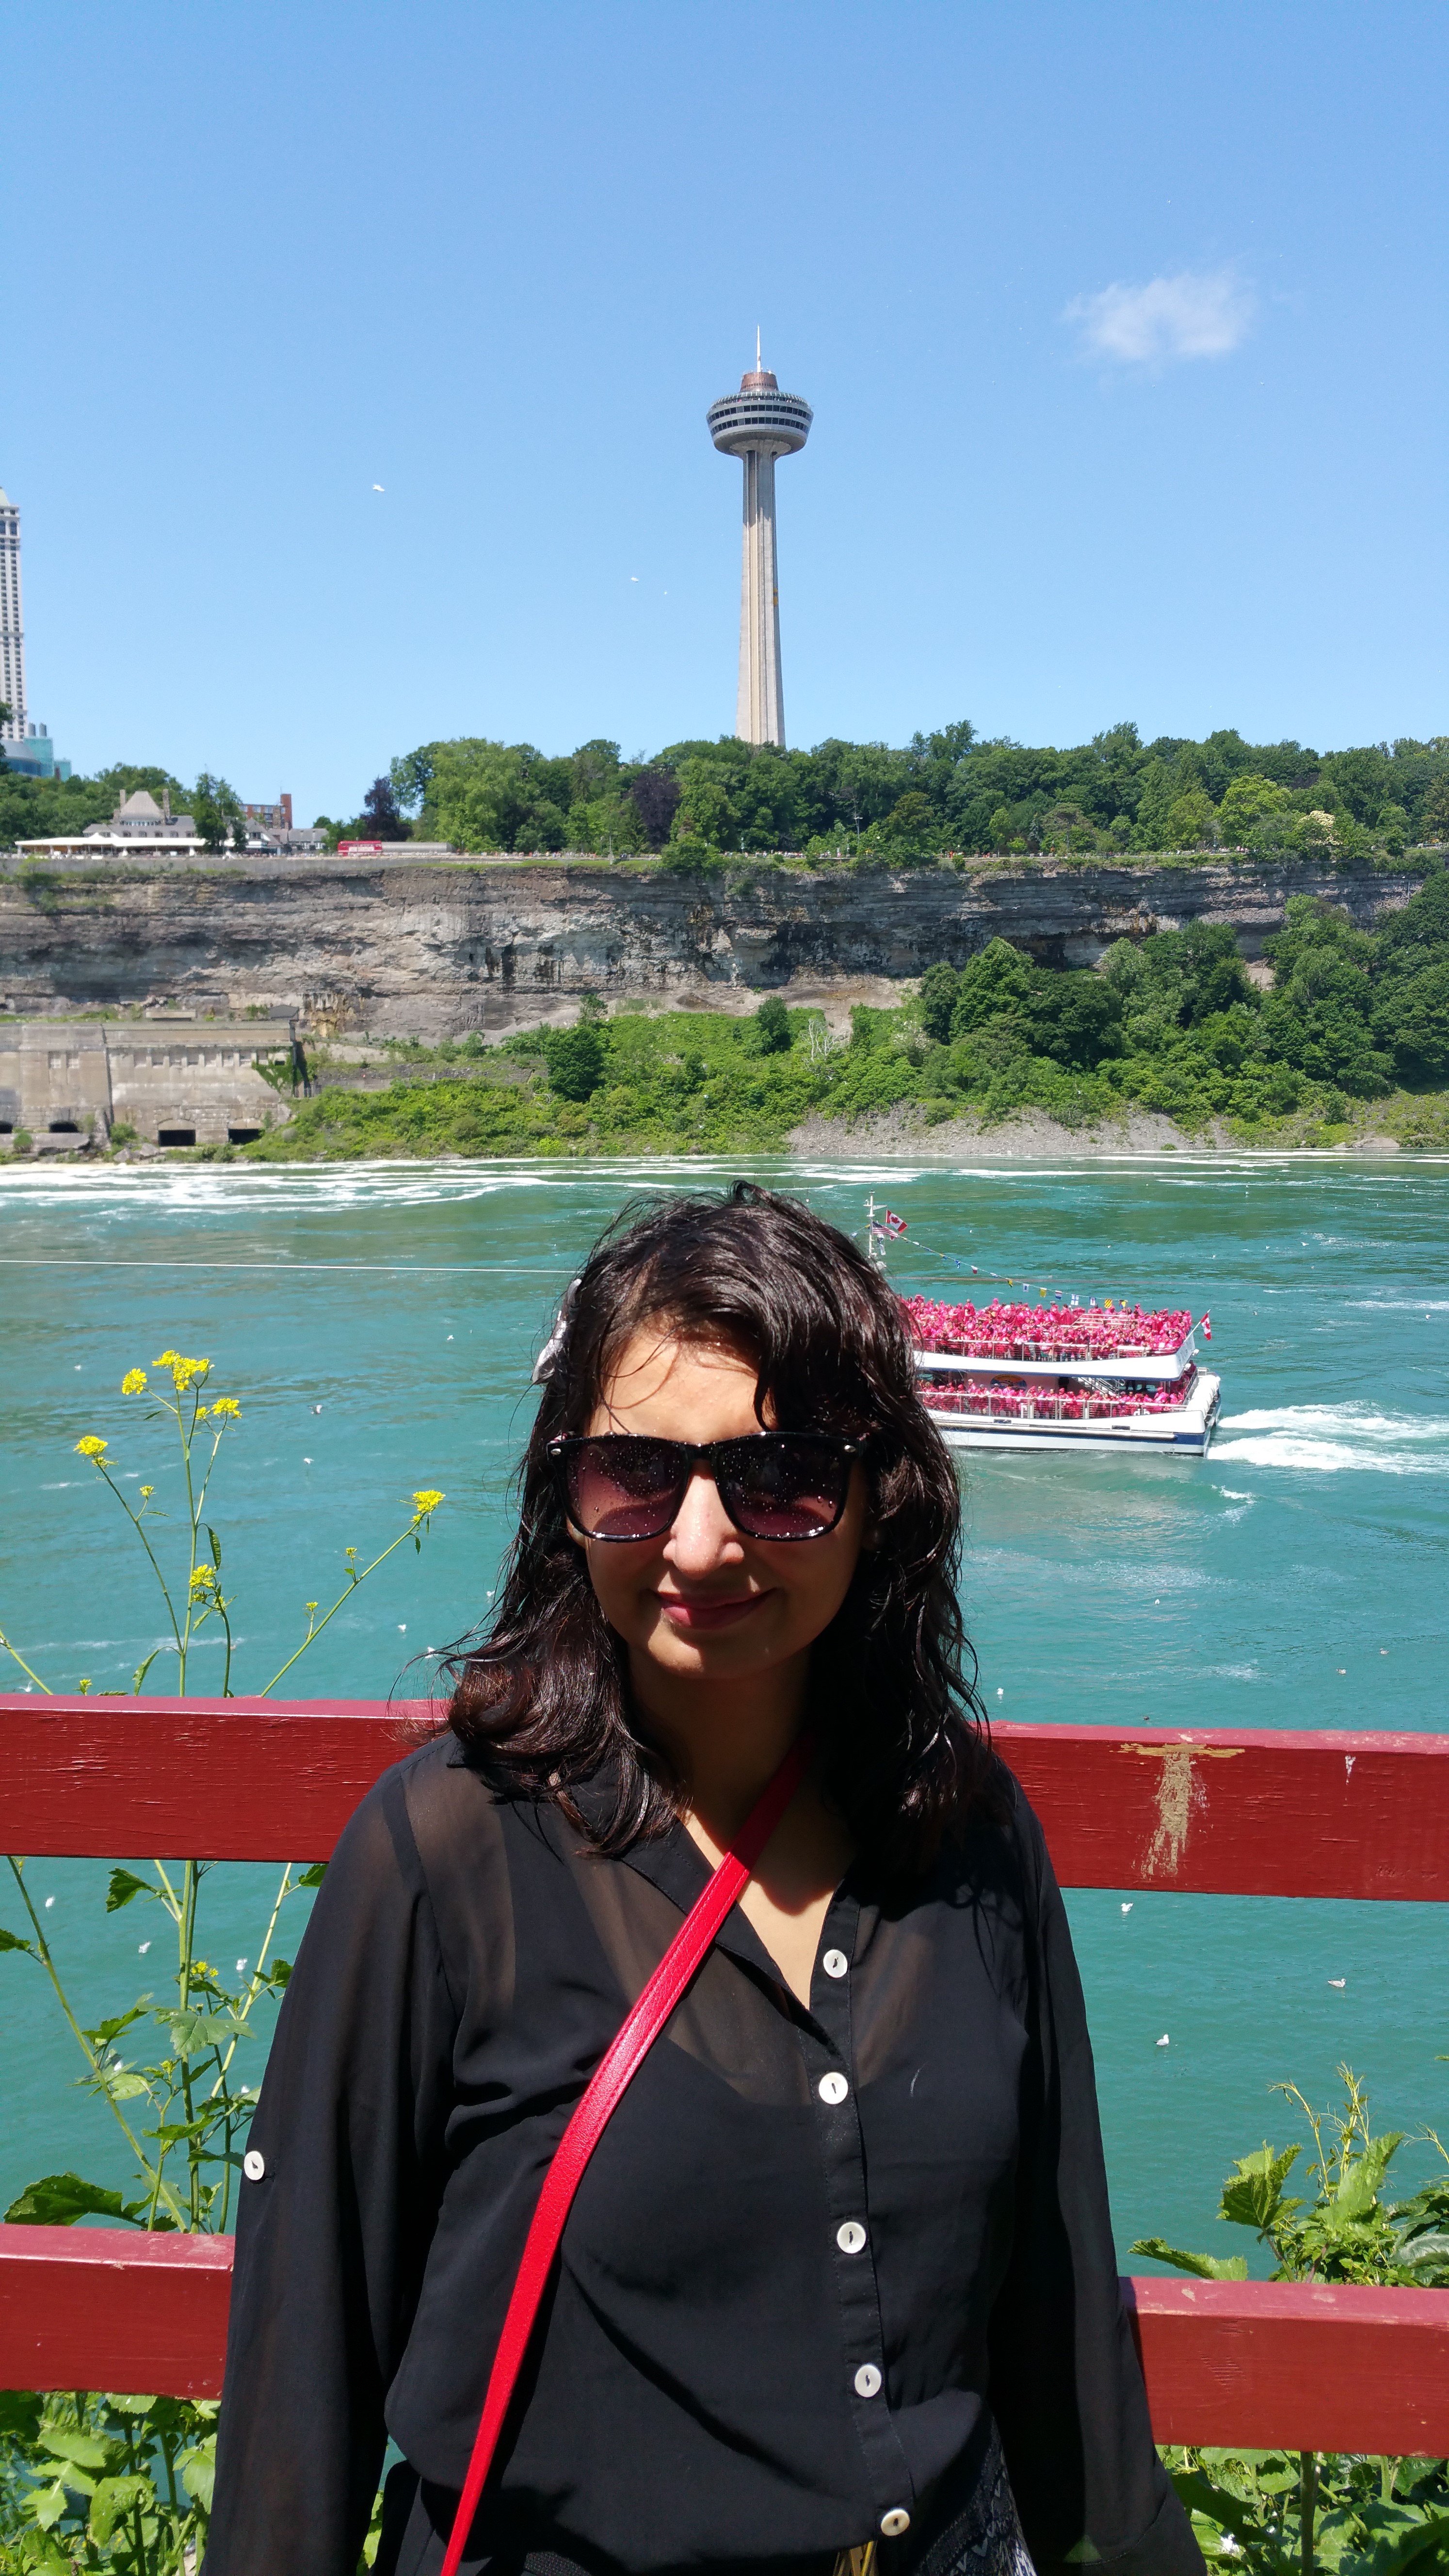 Maid of the Mist- Canadian side